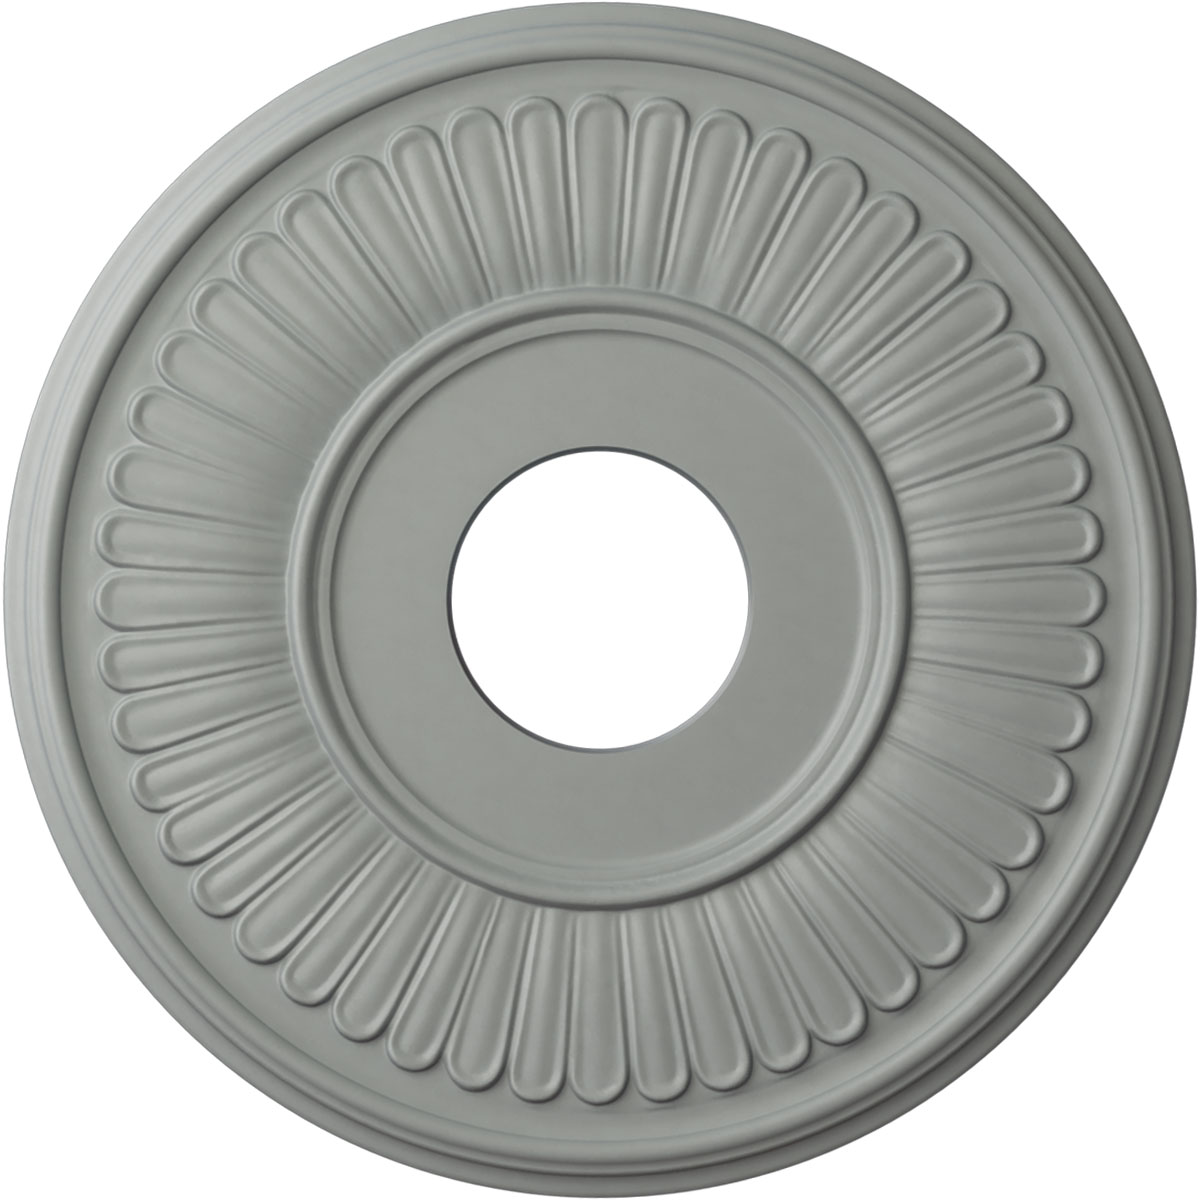 15 3/4-Inch OD x 3 7/8-Inch ID x 3/4-Inch P Berkshire Ceiling Medallion  (Fits Canopies up to 7-Inch )